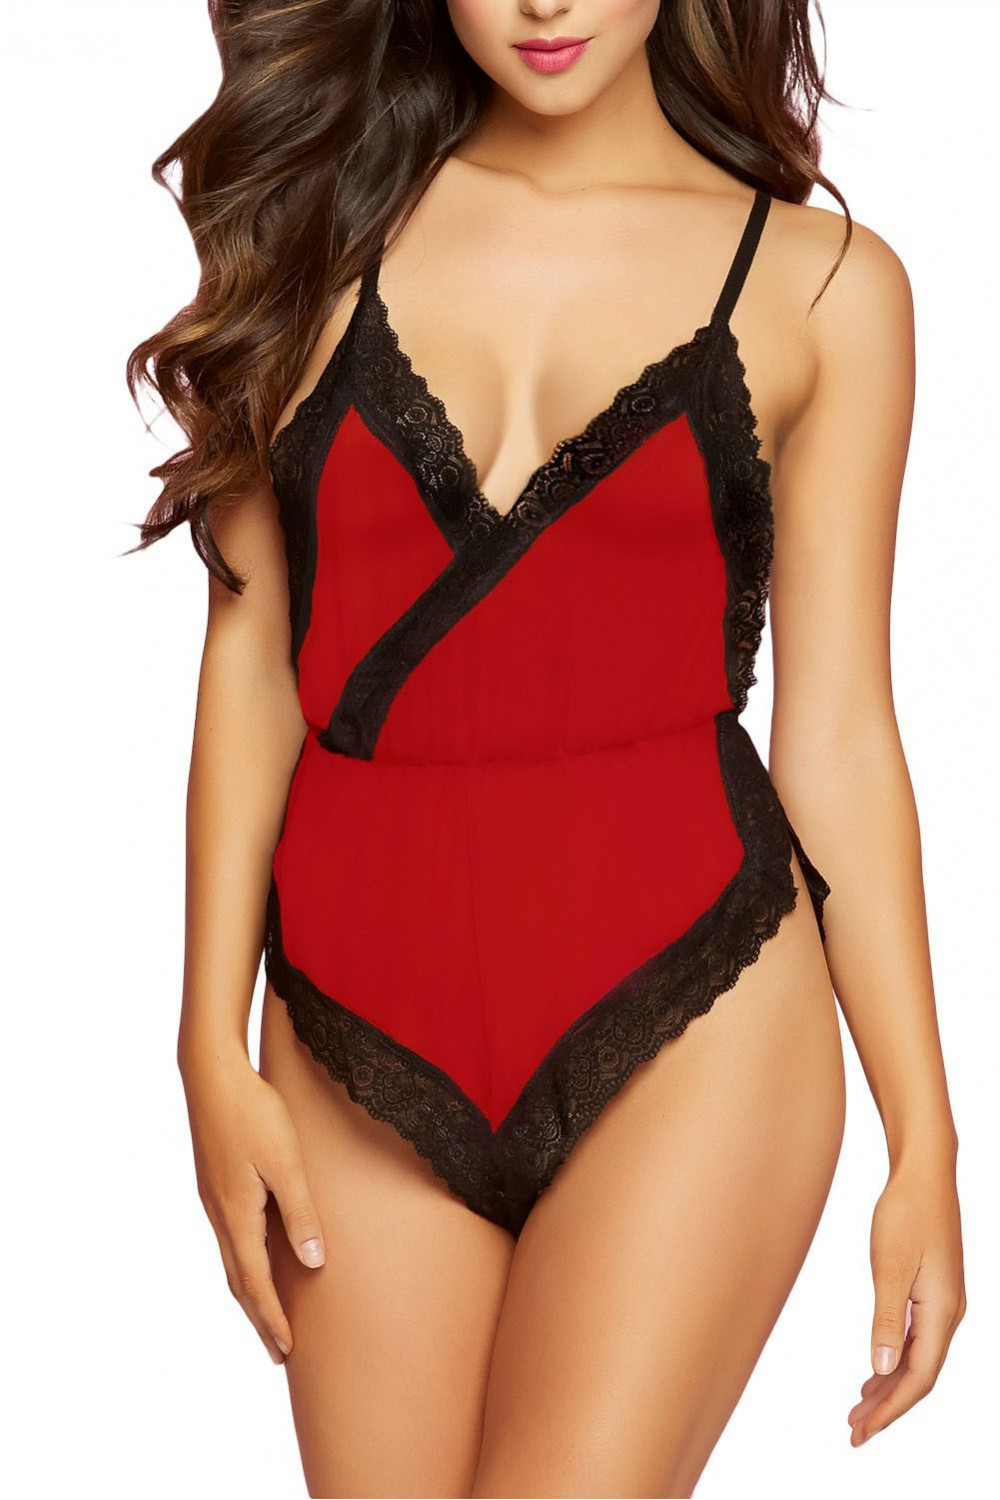 Lingerie clearance - Voile and lace boyshort bodysuit, red